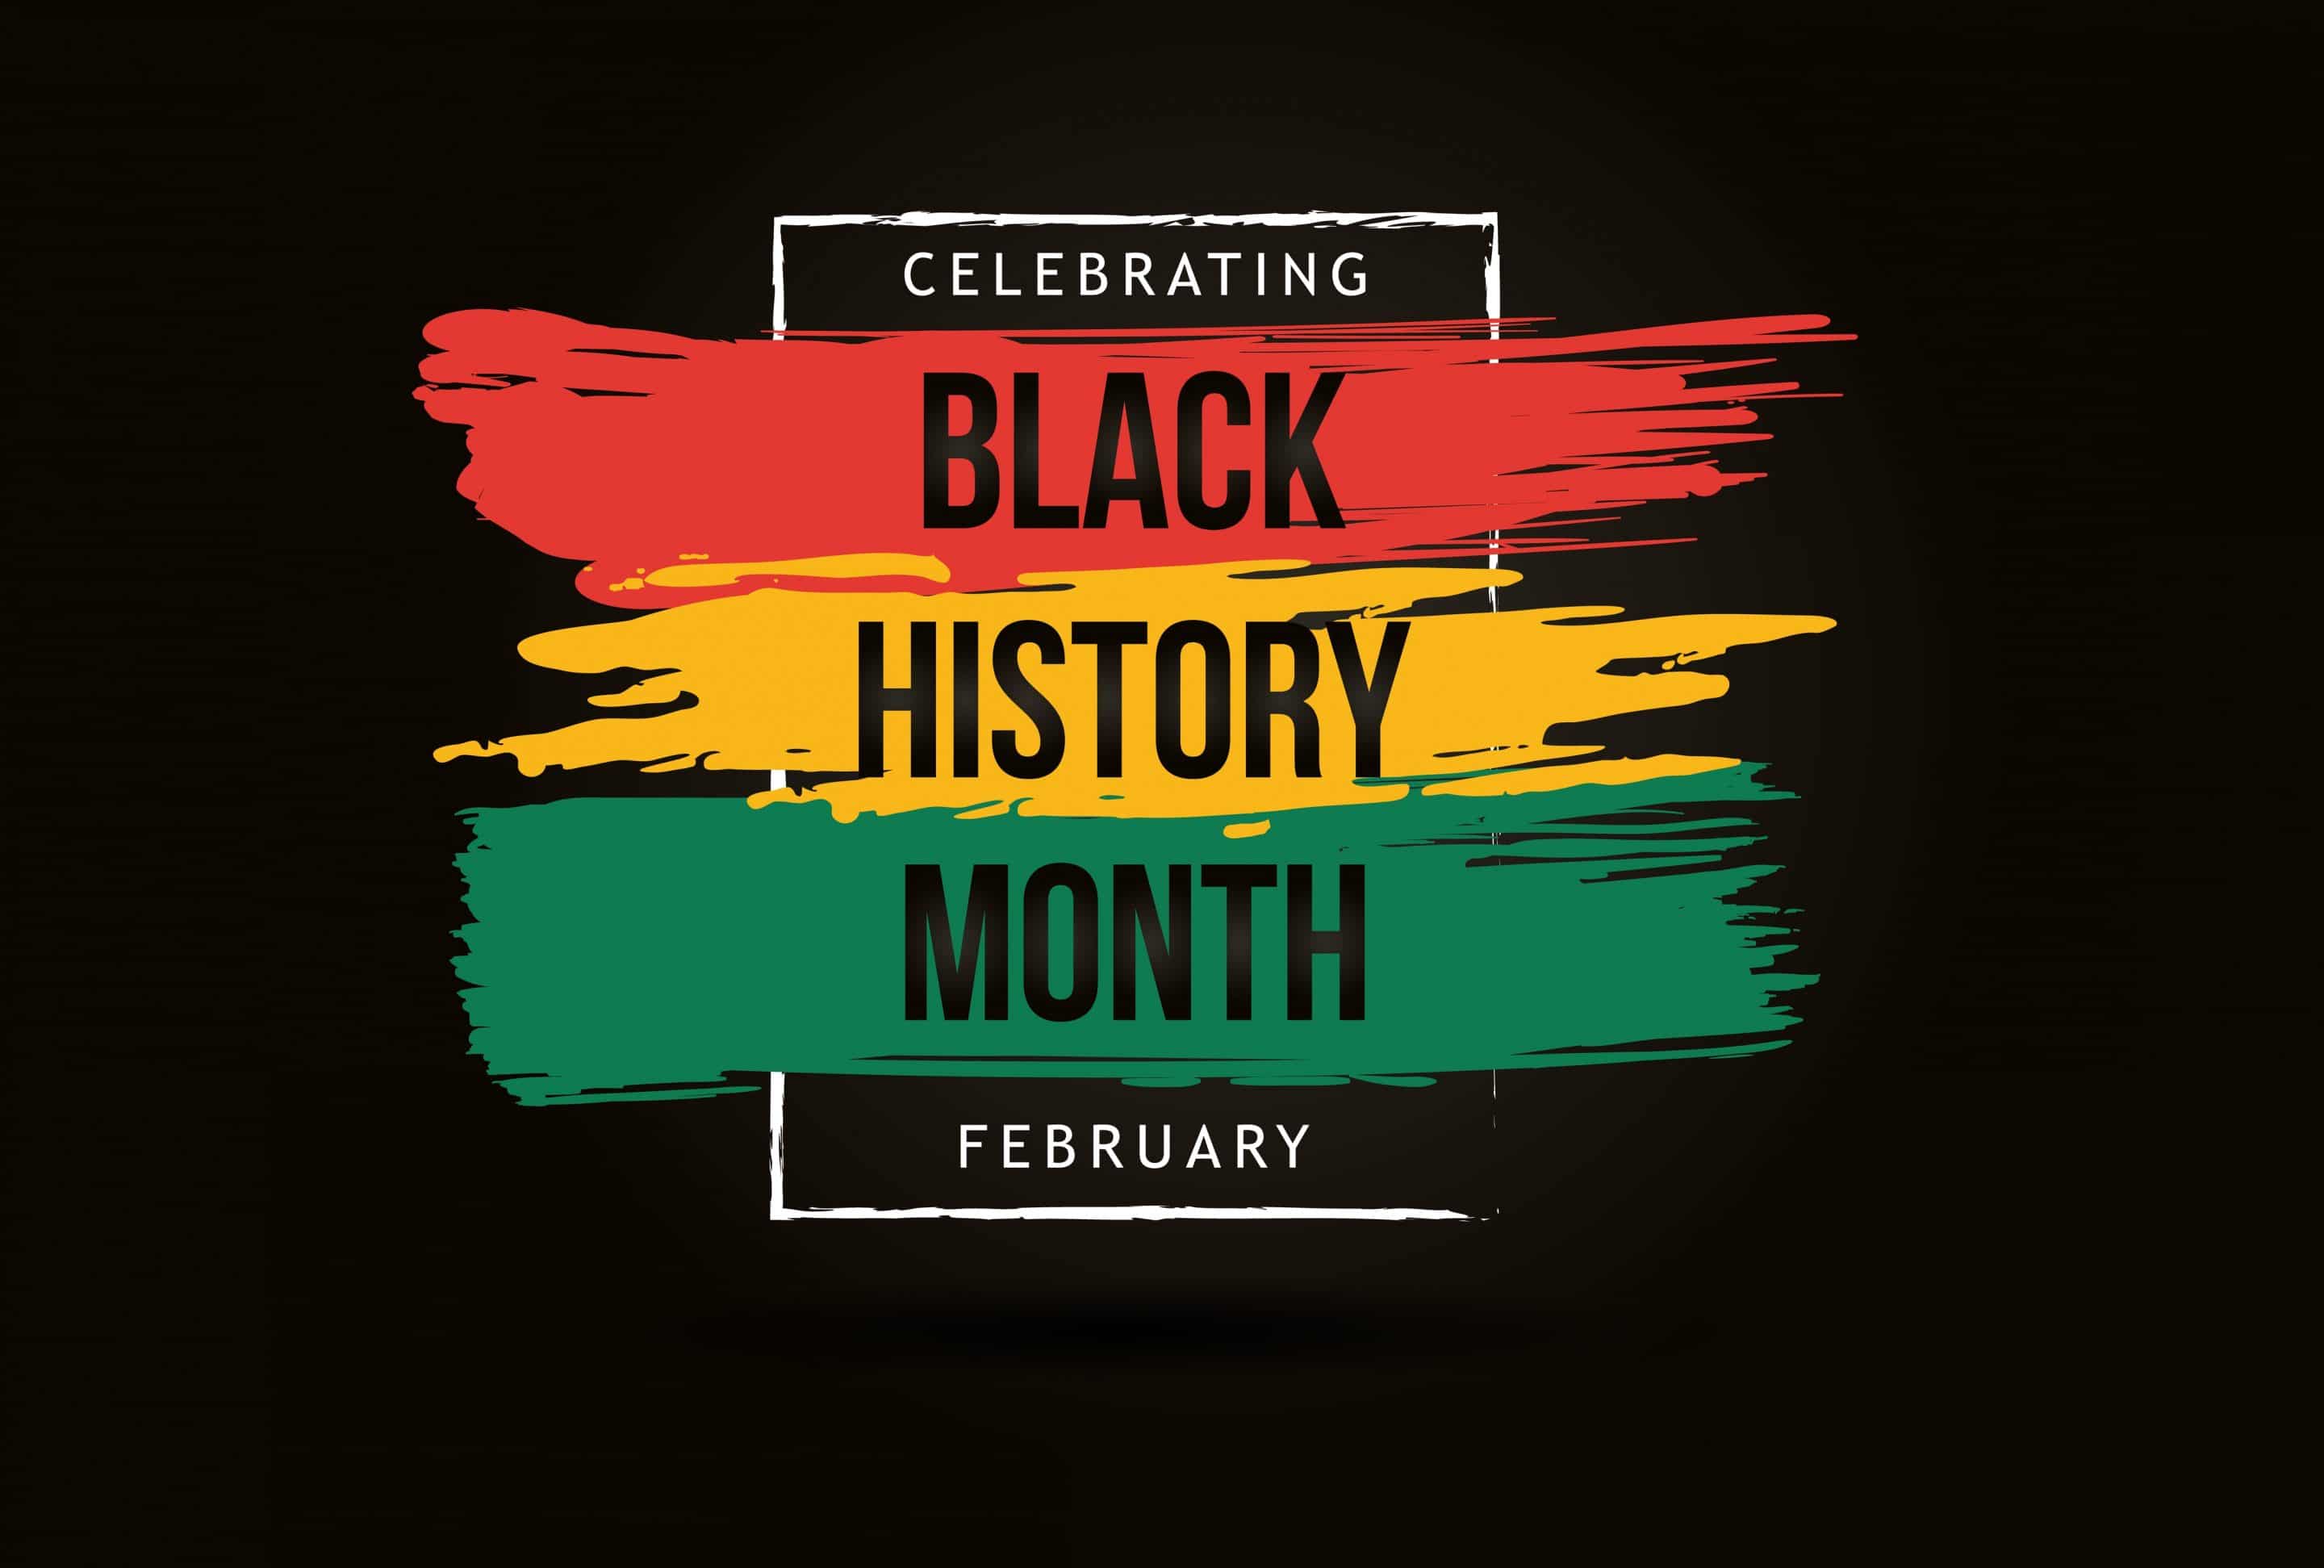 Celebrate Black History Month with special CBC programming